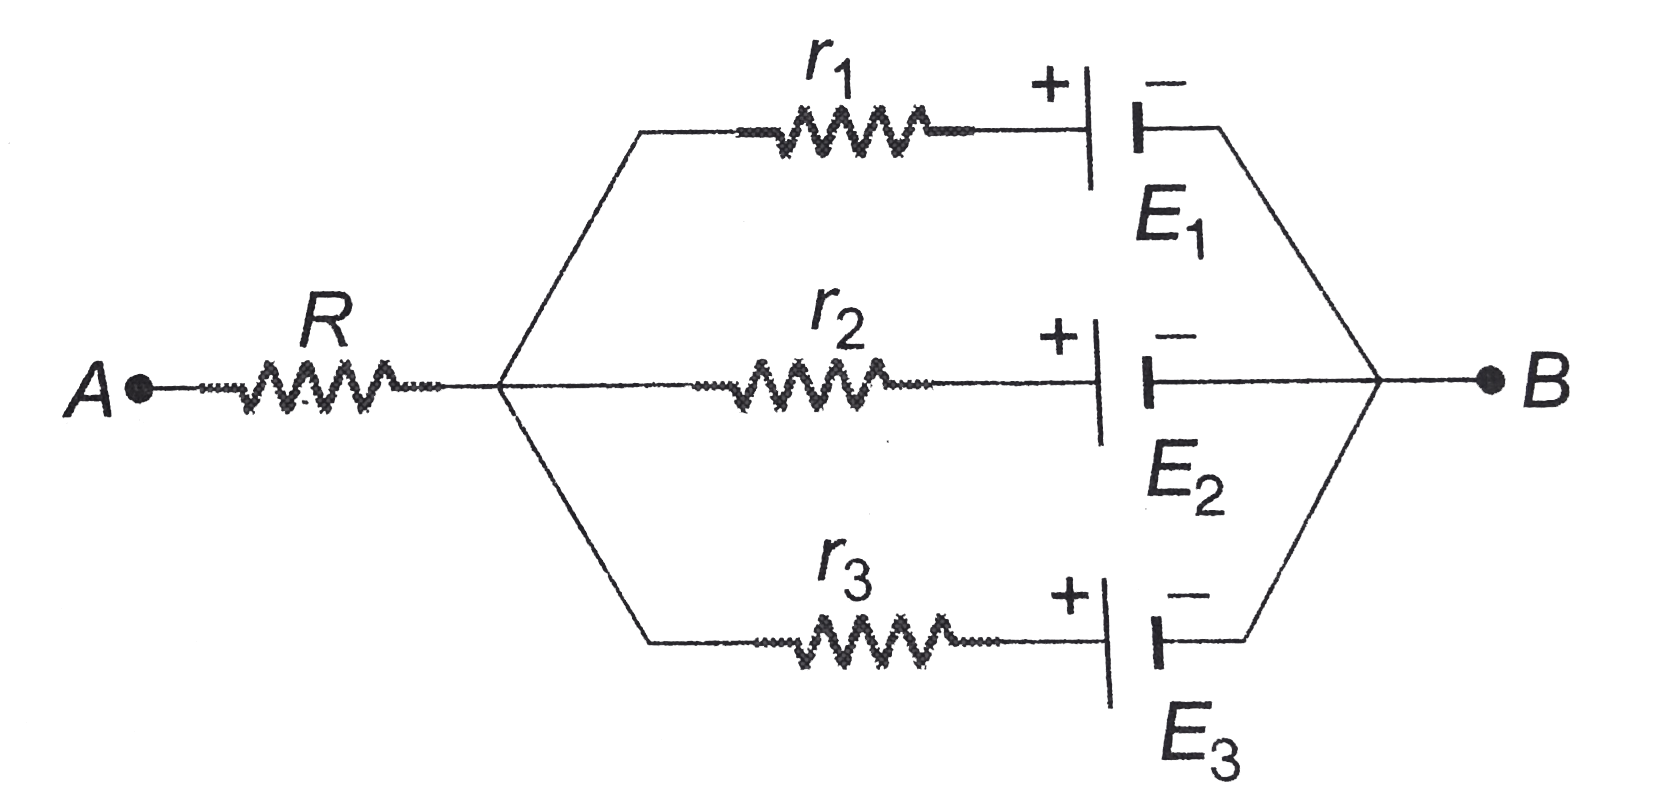 In the circuit in figure E1=3V, E2=2V, E3=1V and R=r1=r2=r3=1Omega       Find the potential differece between the points A and B and the currents through each branch.